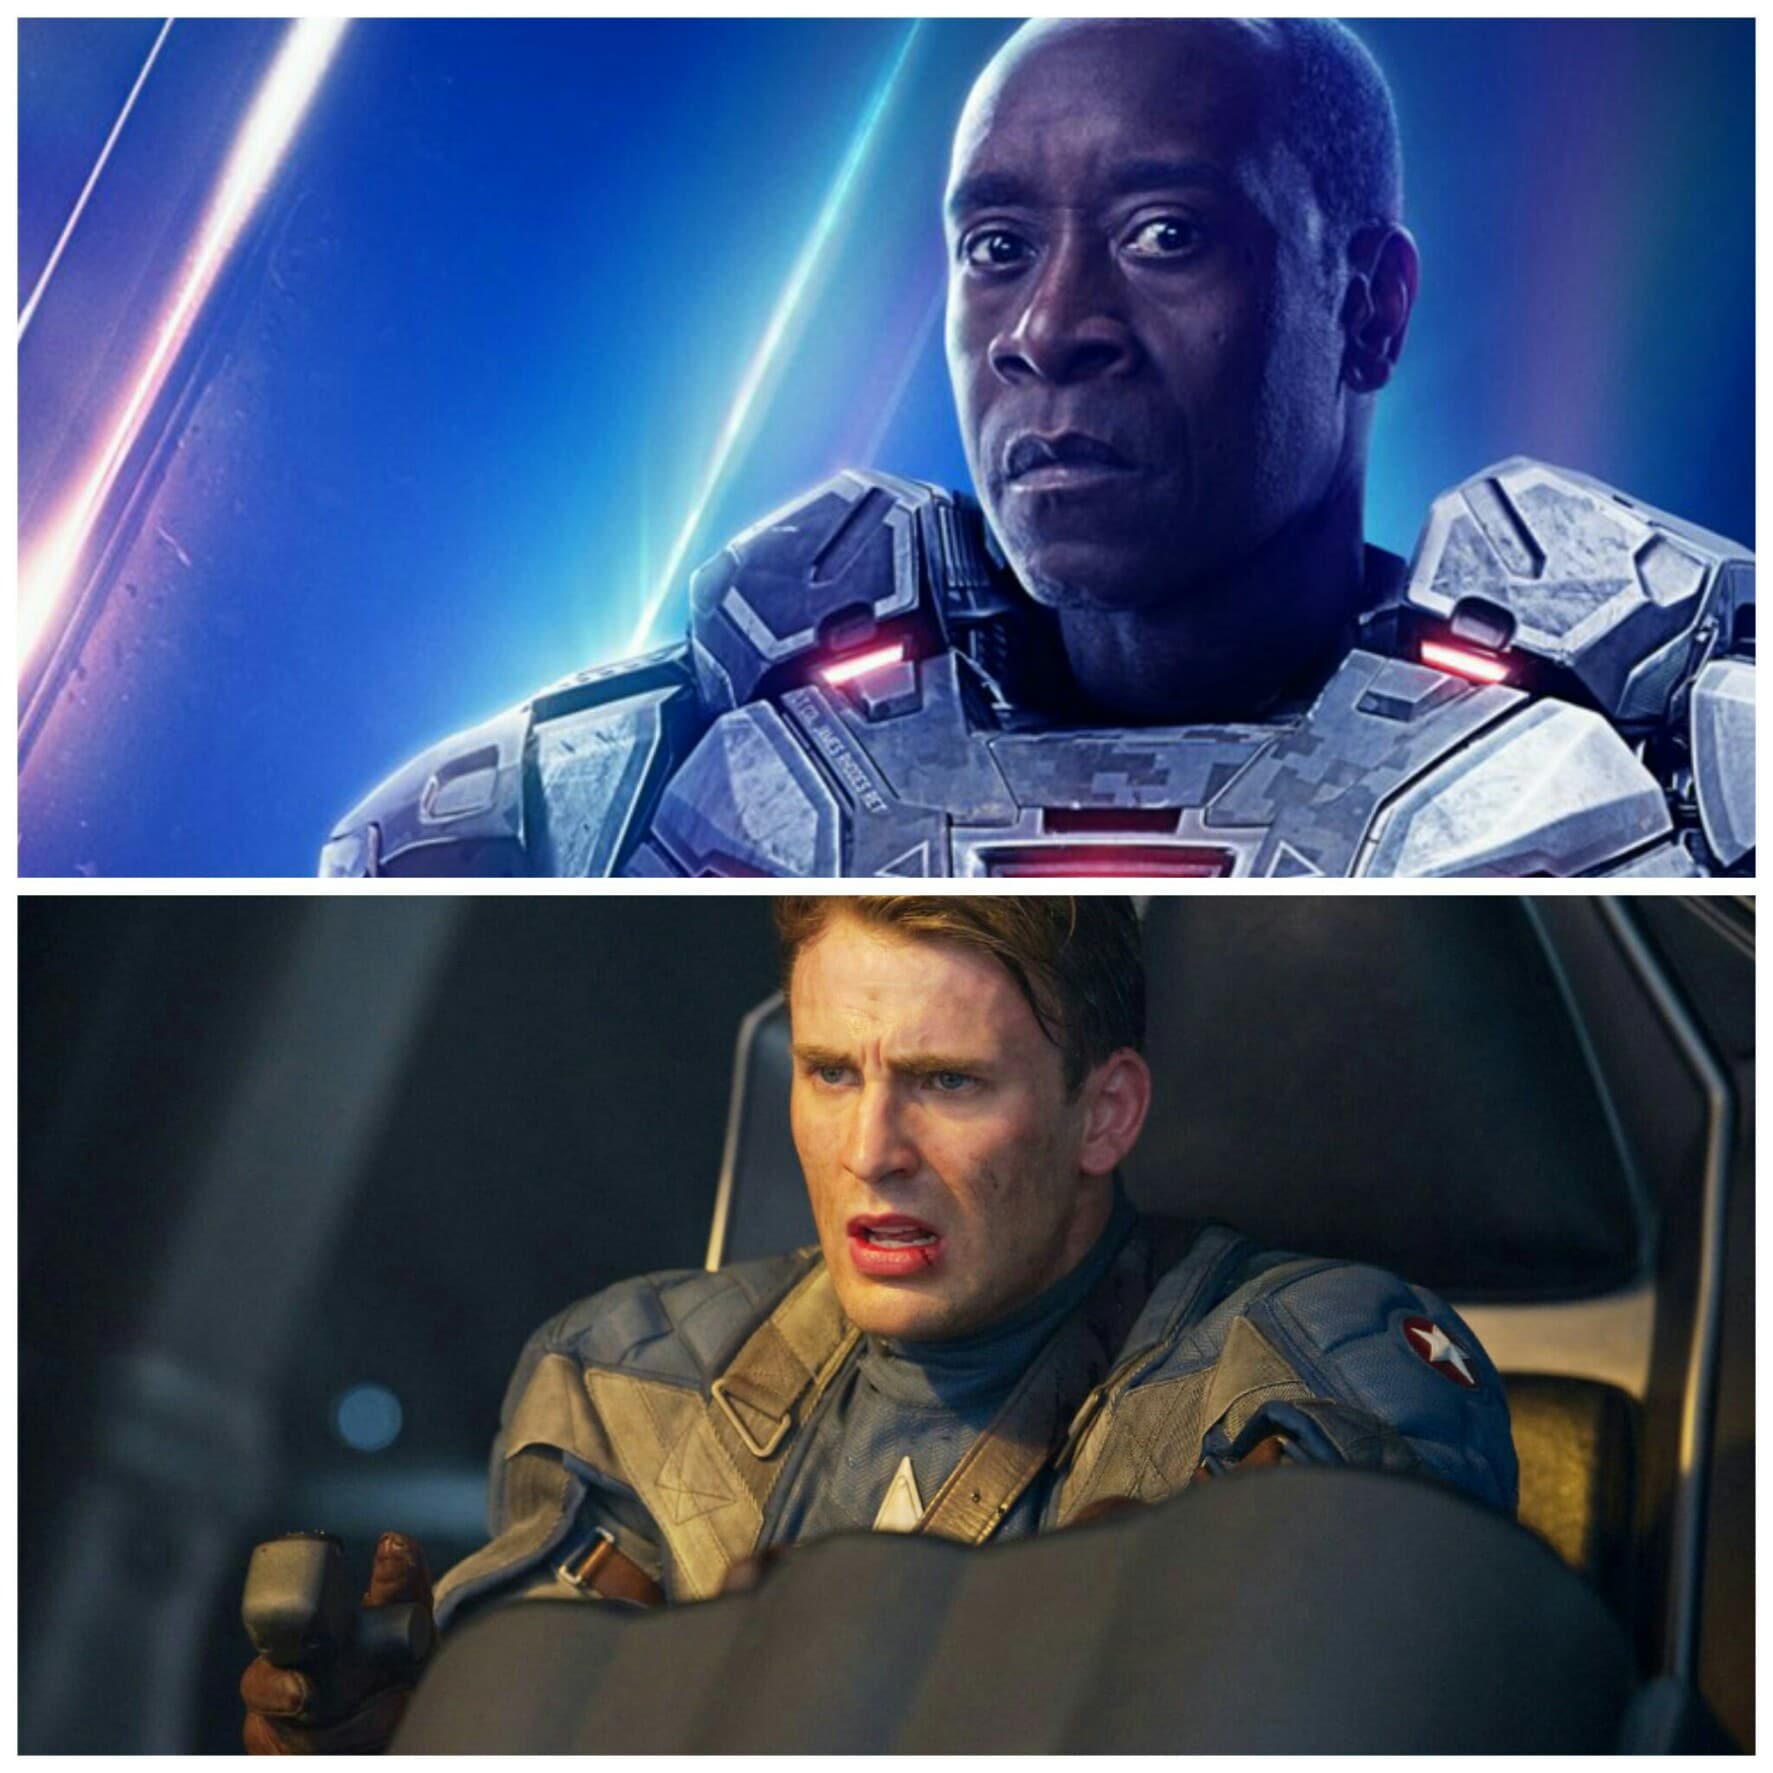 War Machine Asks Captain America A Very Intriguing Question In Endgame Deleted Scene